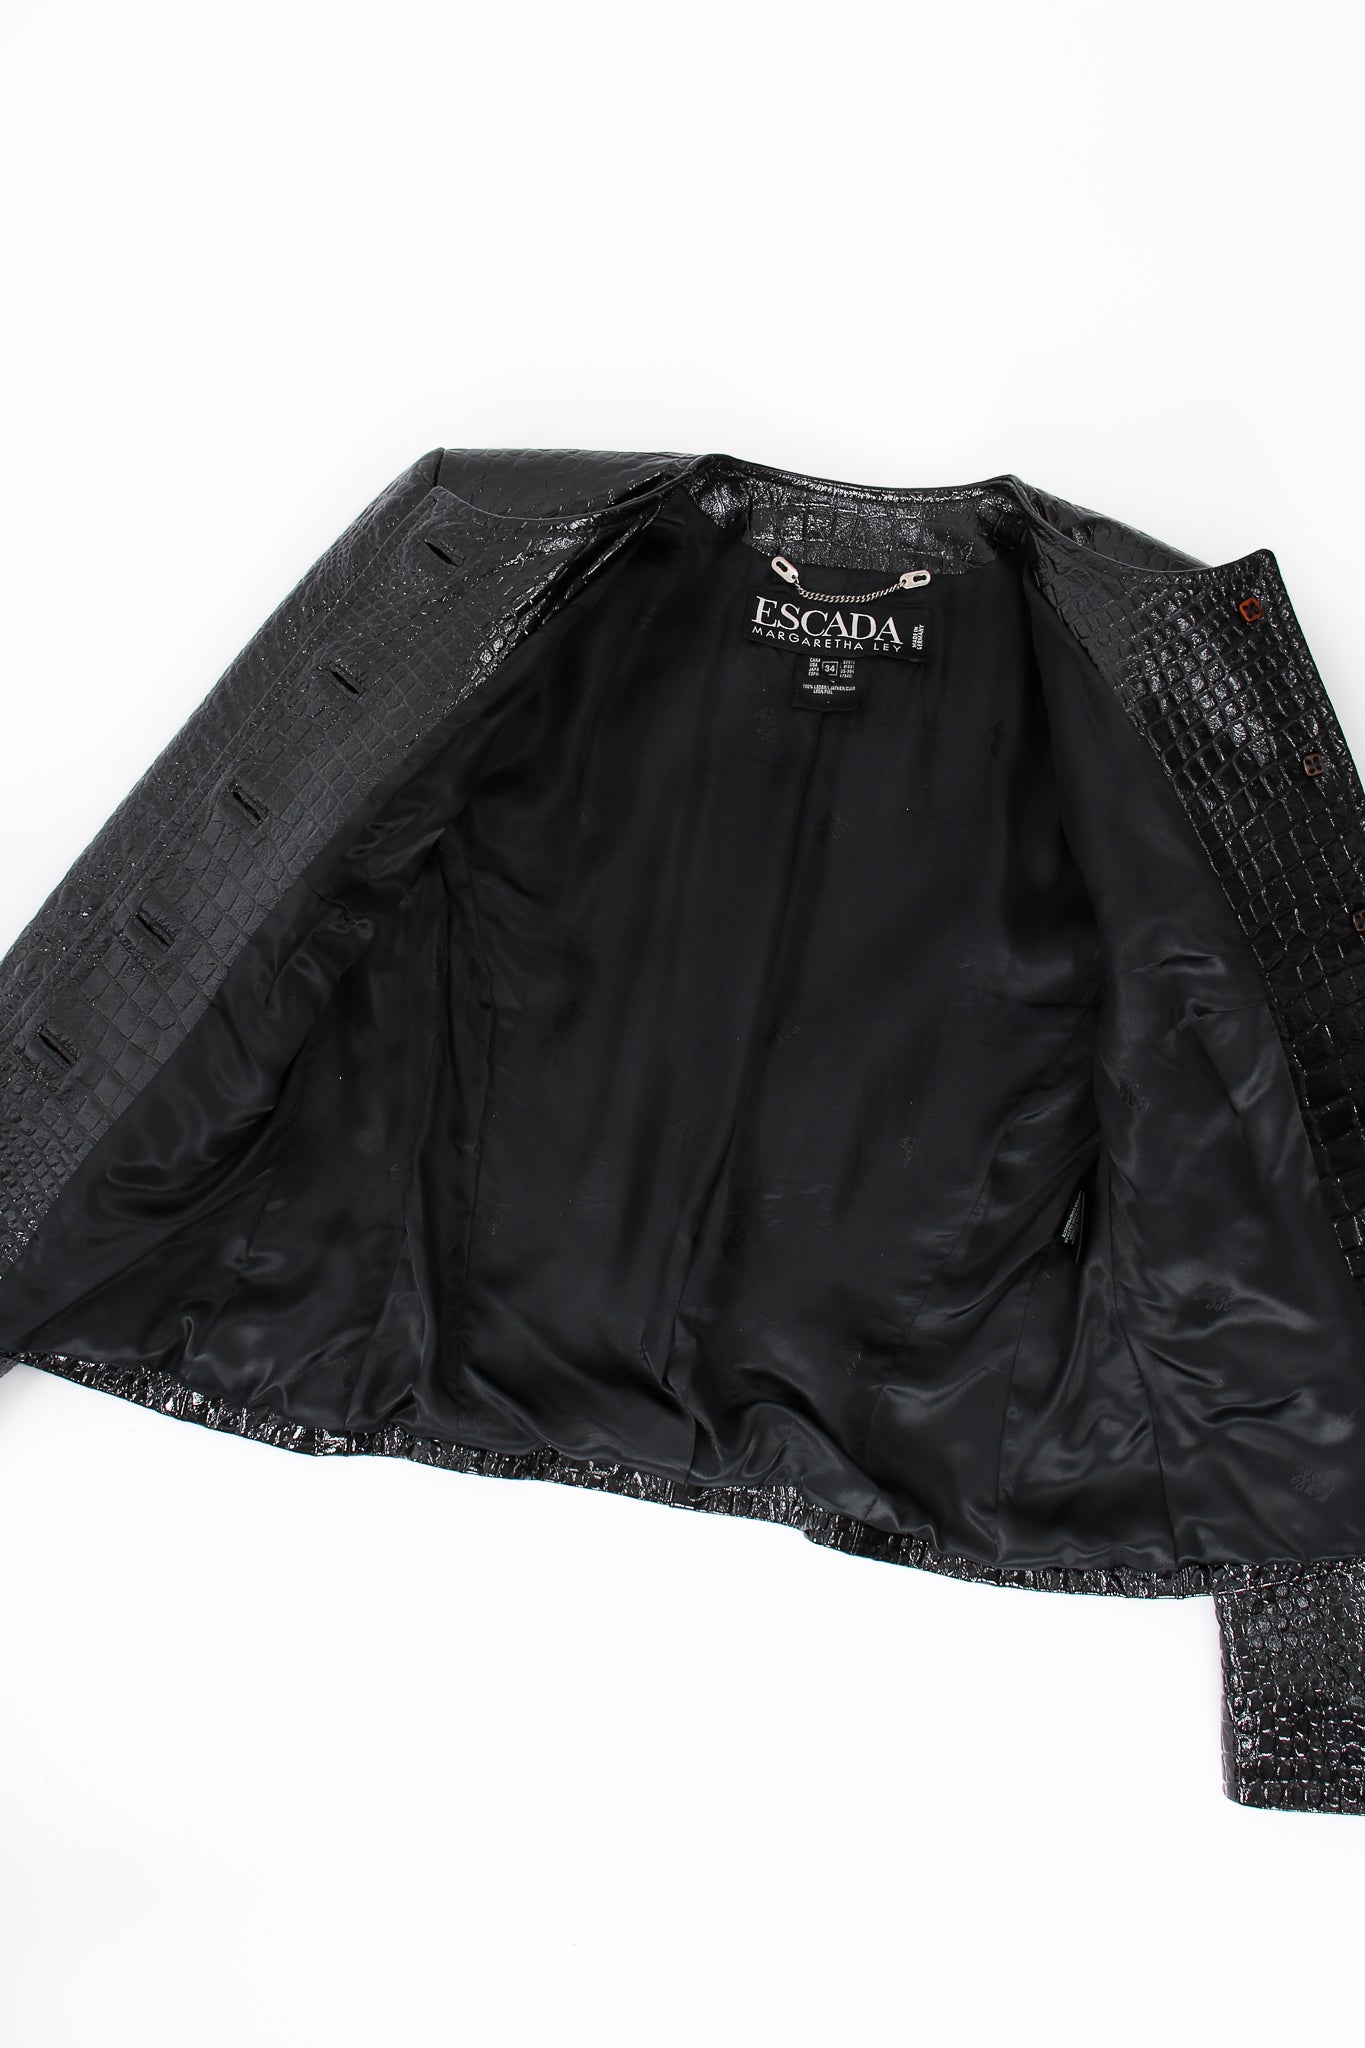 Vintage Escada Patent Leather Embossed Gator Jacket lining at Recess Los Angeles